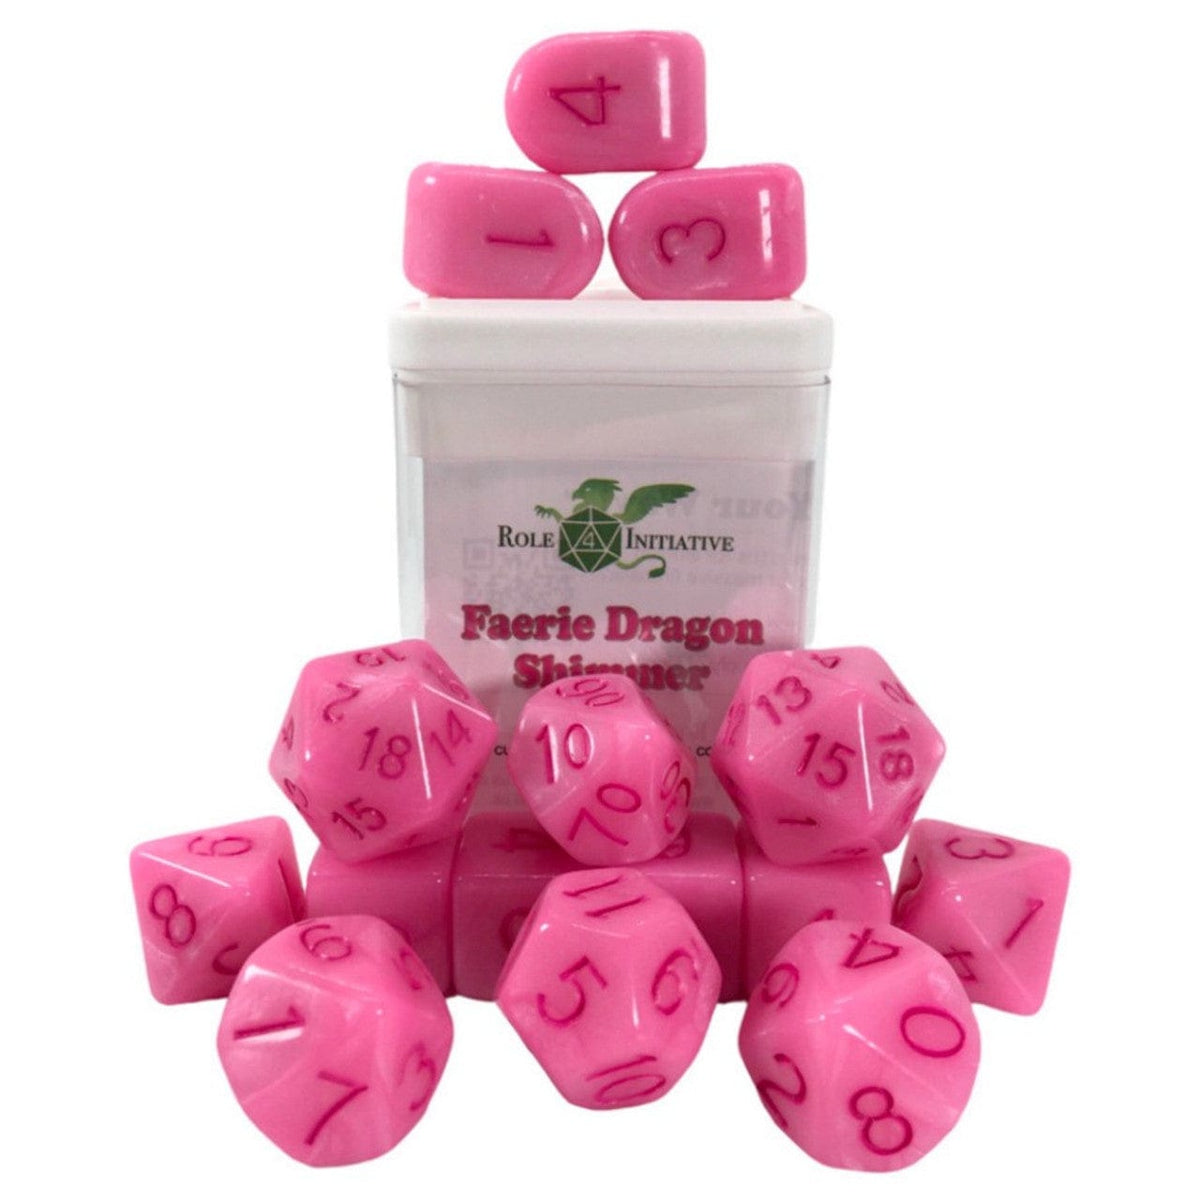 Role 4 Initiative: Polyhedral Dice 15ct - Faerie Dragon Shimmer